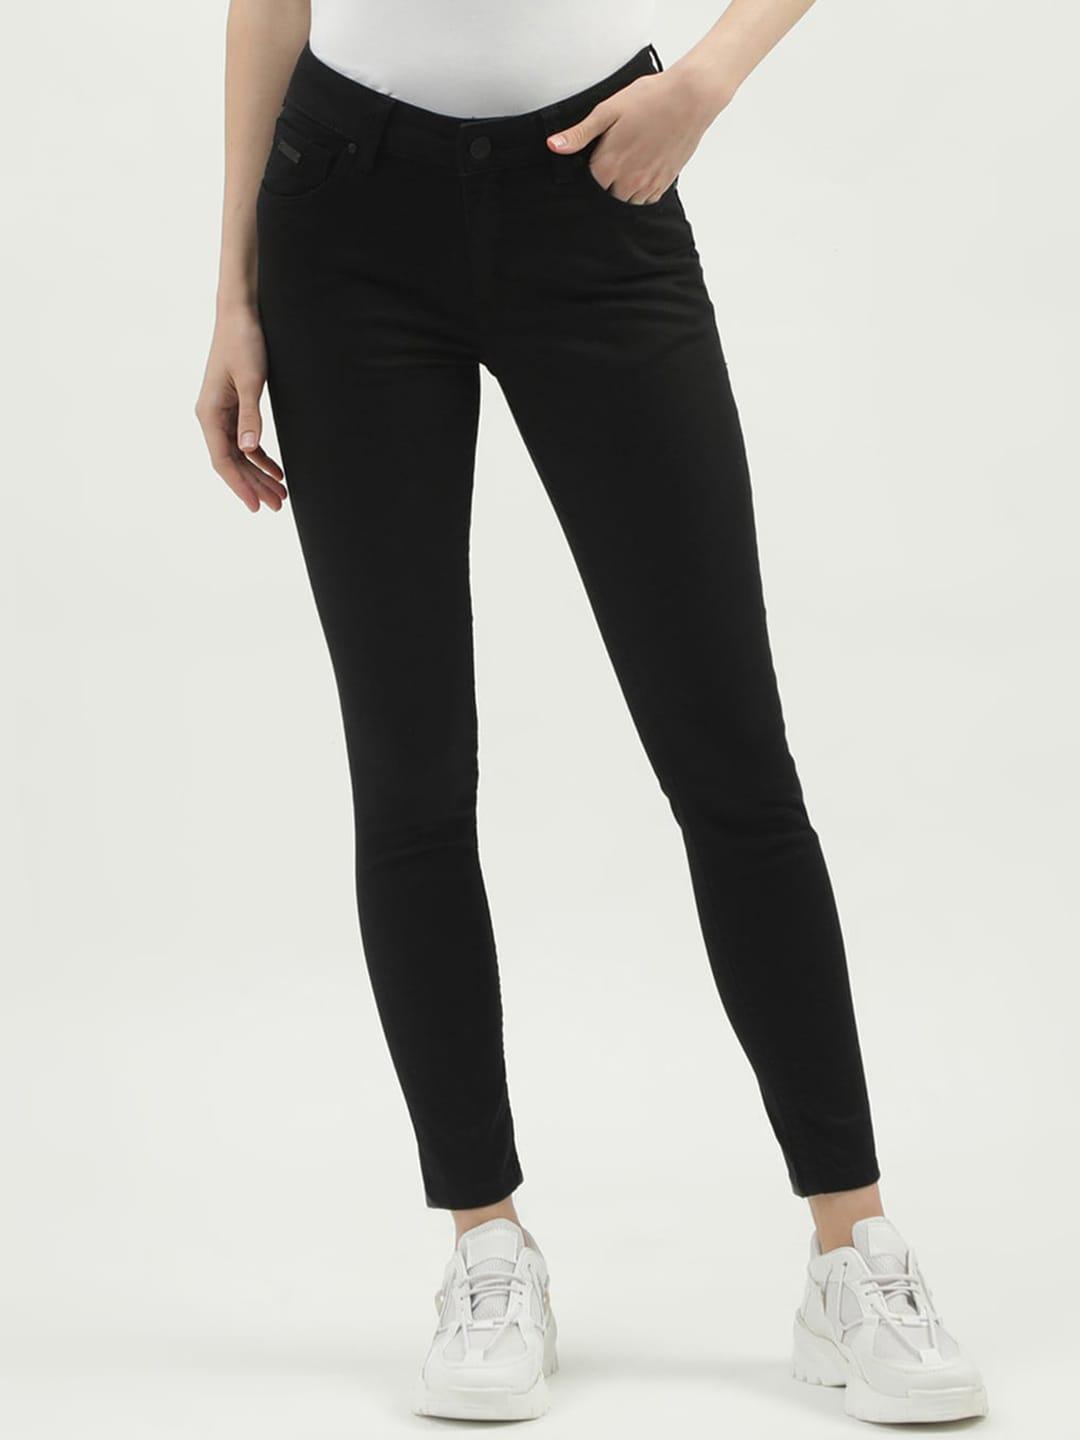 united colors of benetton women black skinny fit jeans